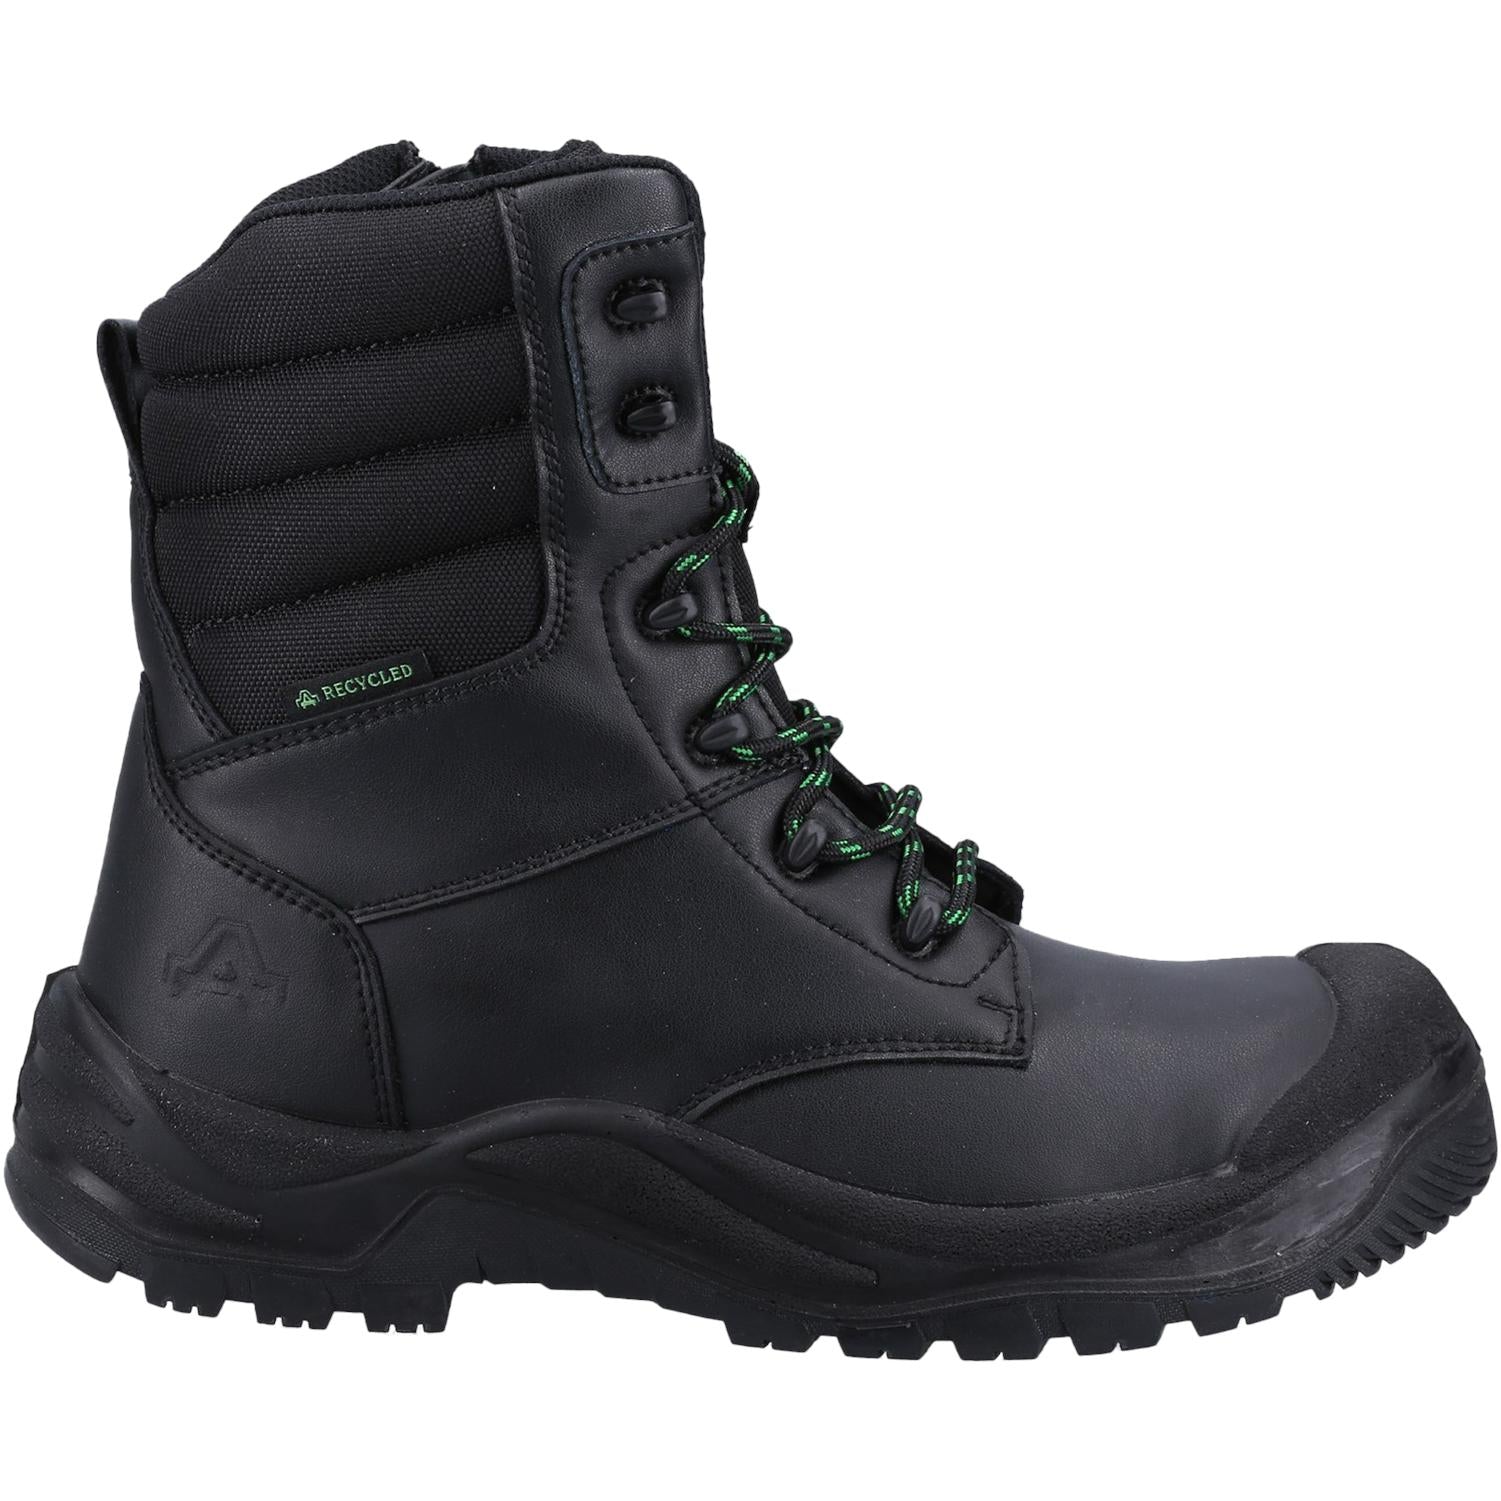 Amblers Safety 503 Safety Boots